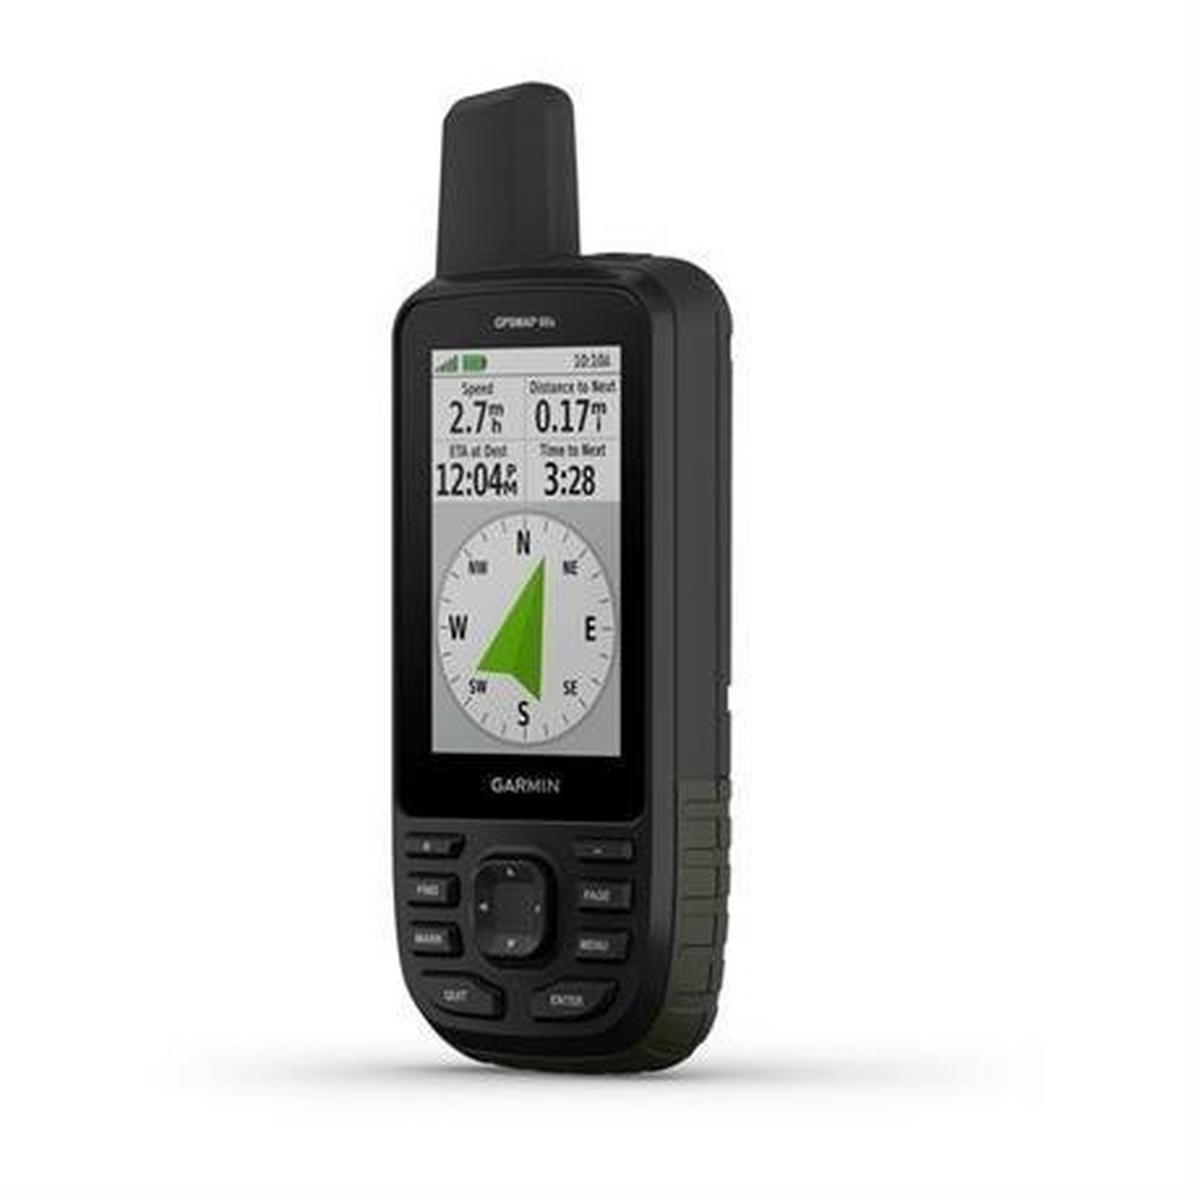 Garmin GPS MAP 66s (device only, no pre-installed maps)